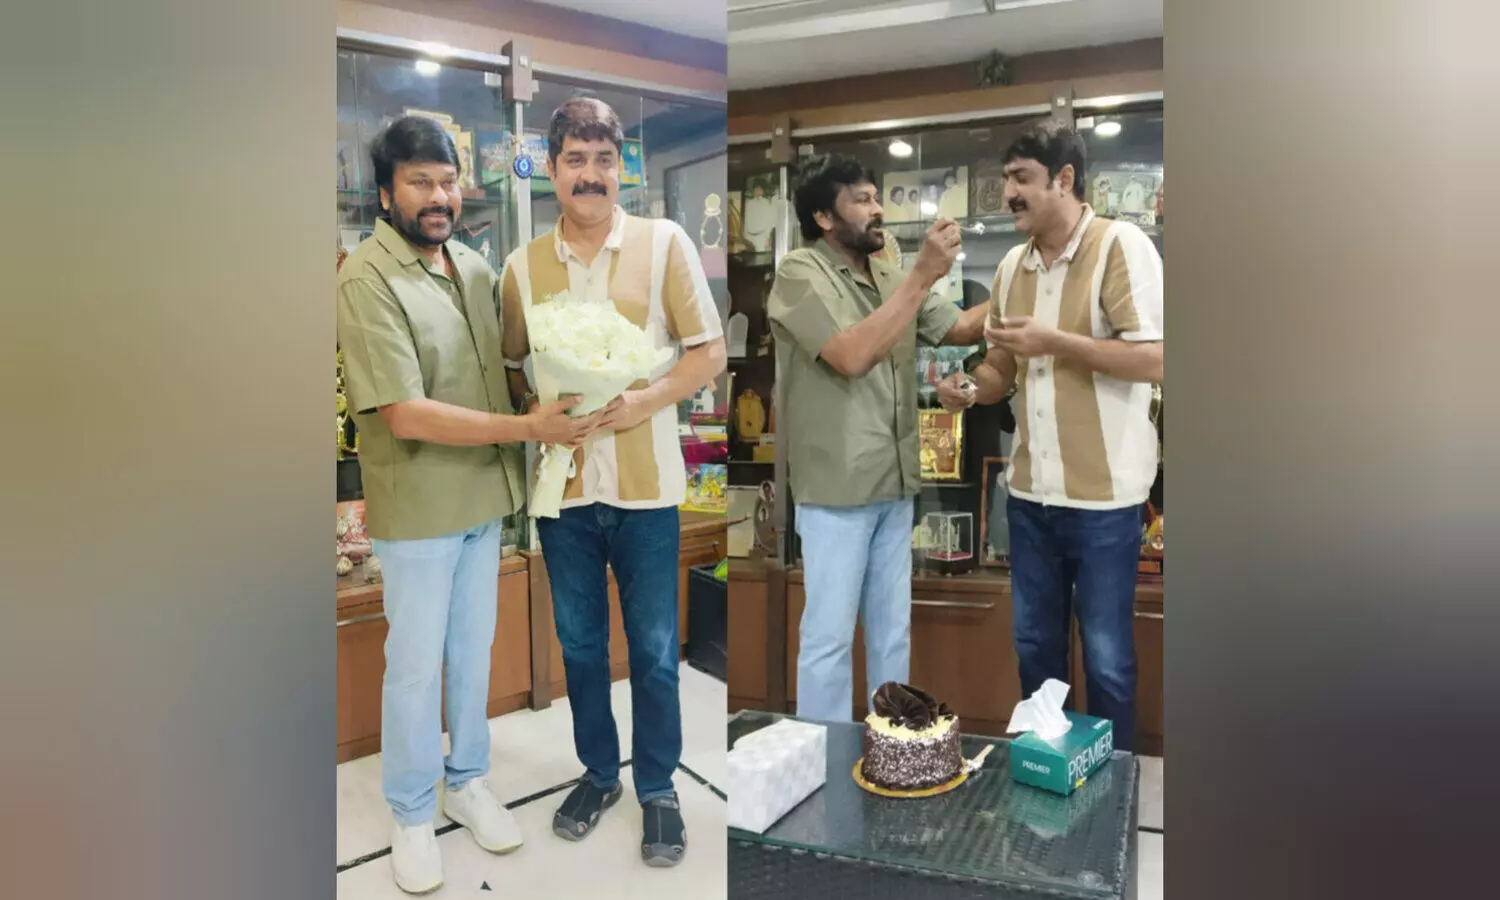 Surprise: Megastar Chiranjeevi throws a surprise on his co-actor Srikanths birthday